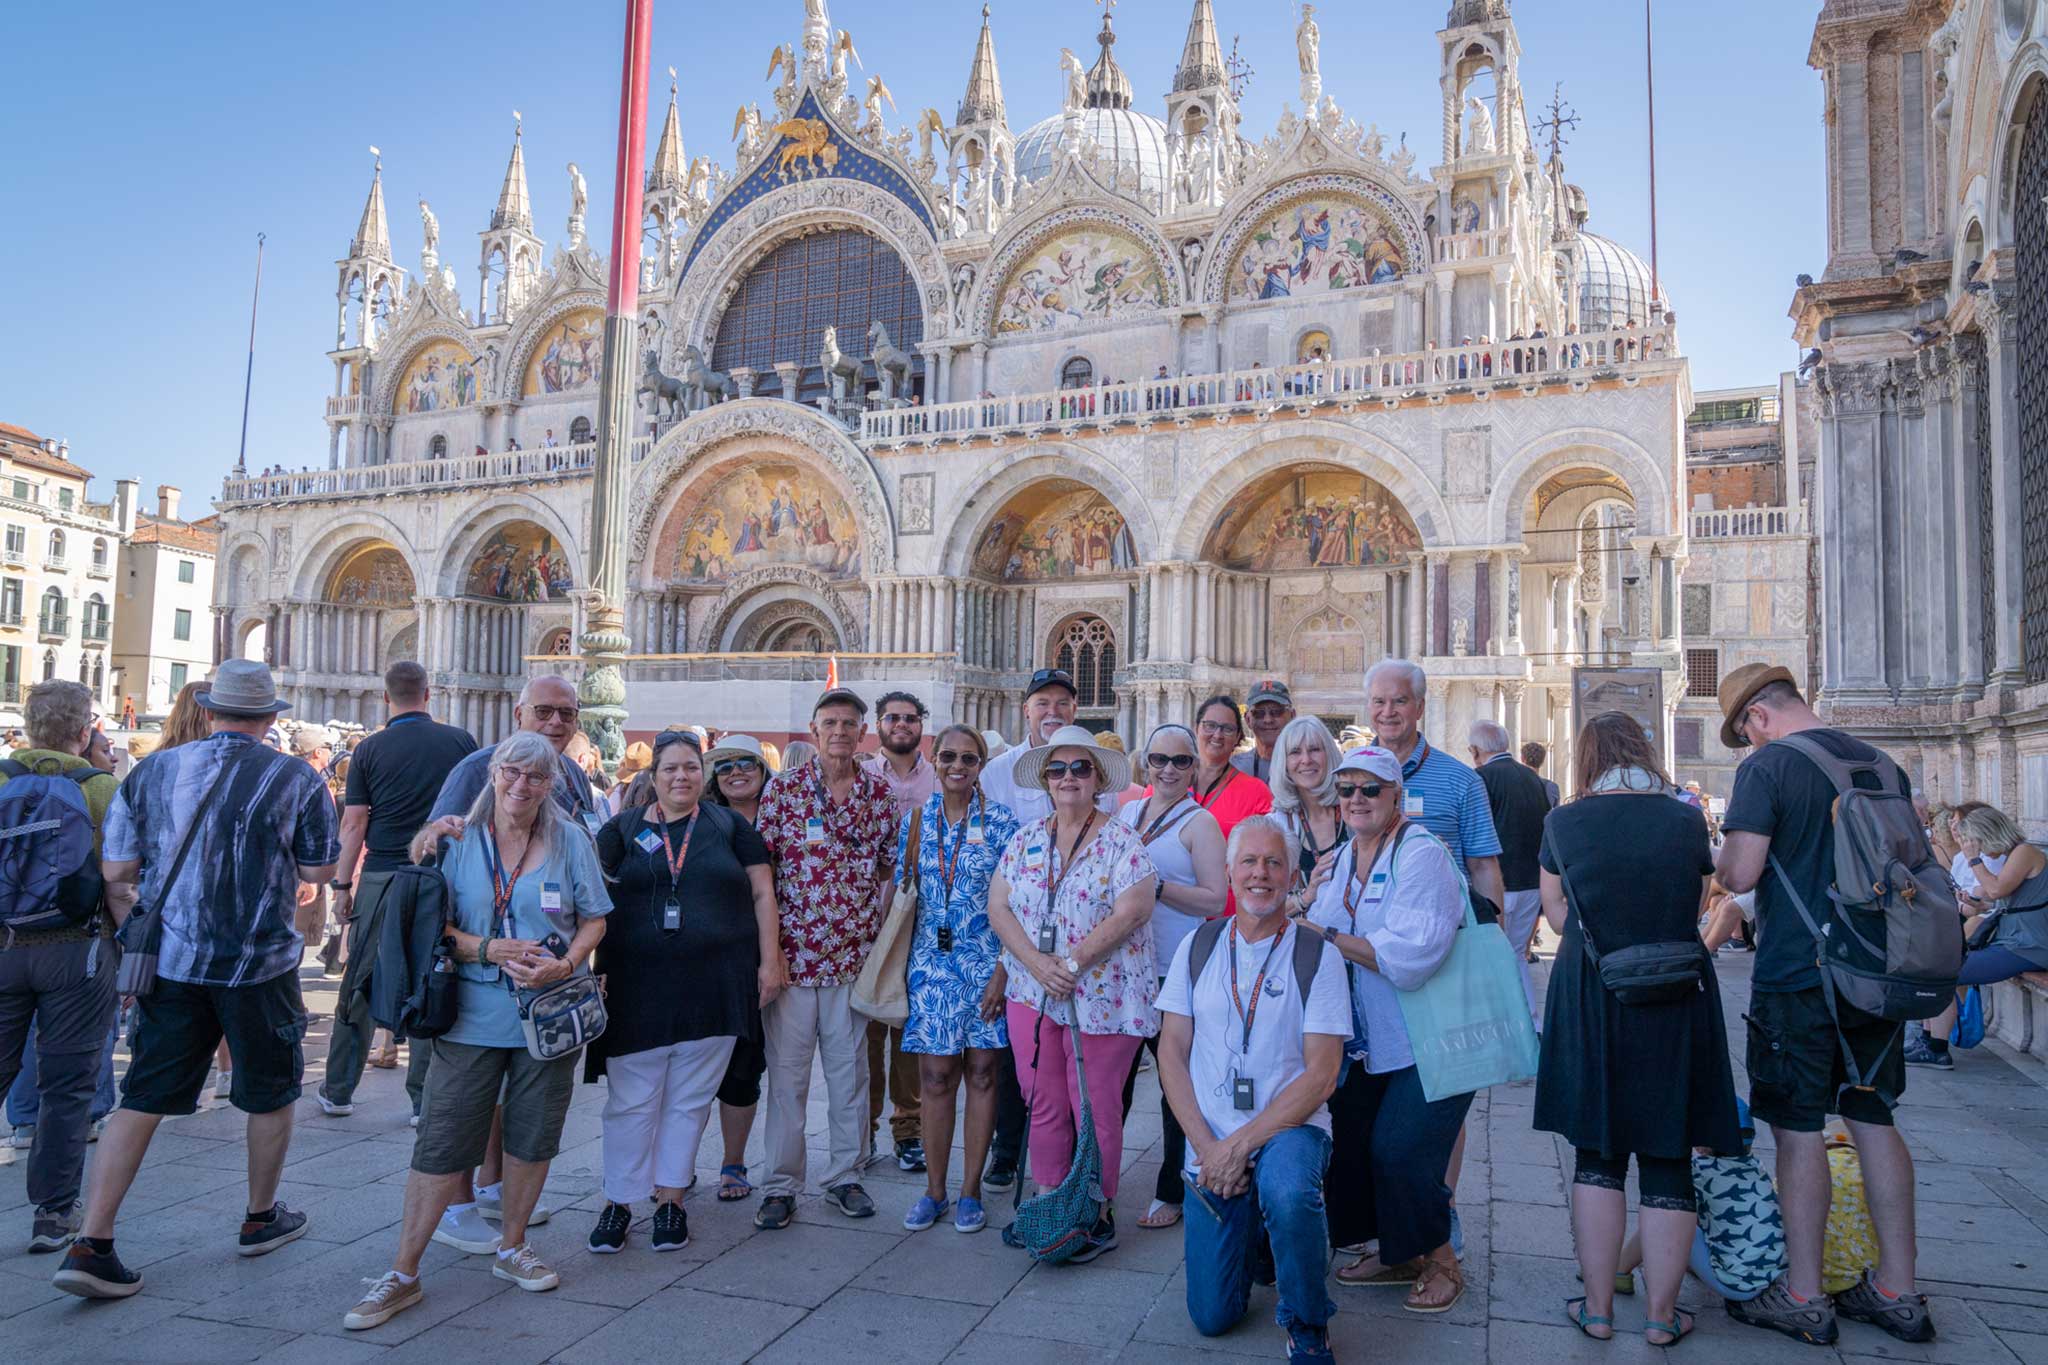 A group of travelers pose for the camera in the busy plaza of Saint Mark's Basilica church in Venice, Italy.